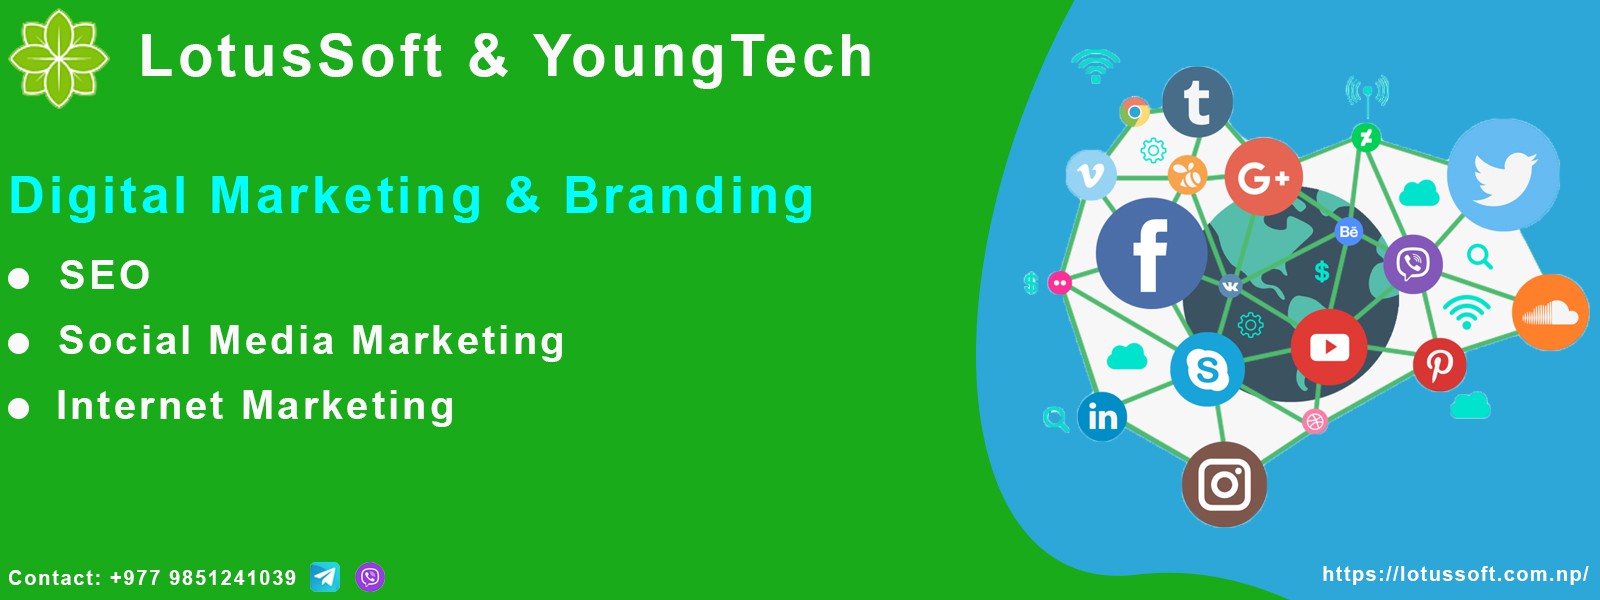 LSYT is the one of the best digital agency in Nepal and worldwide